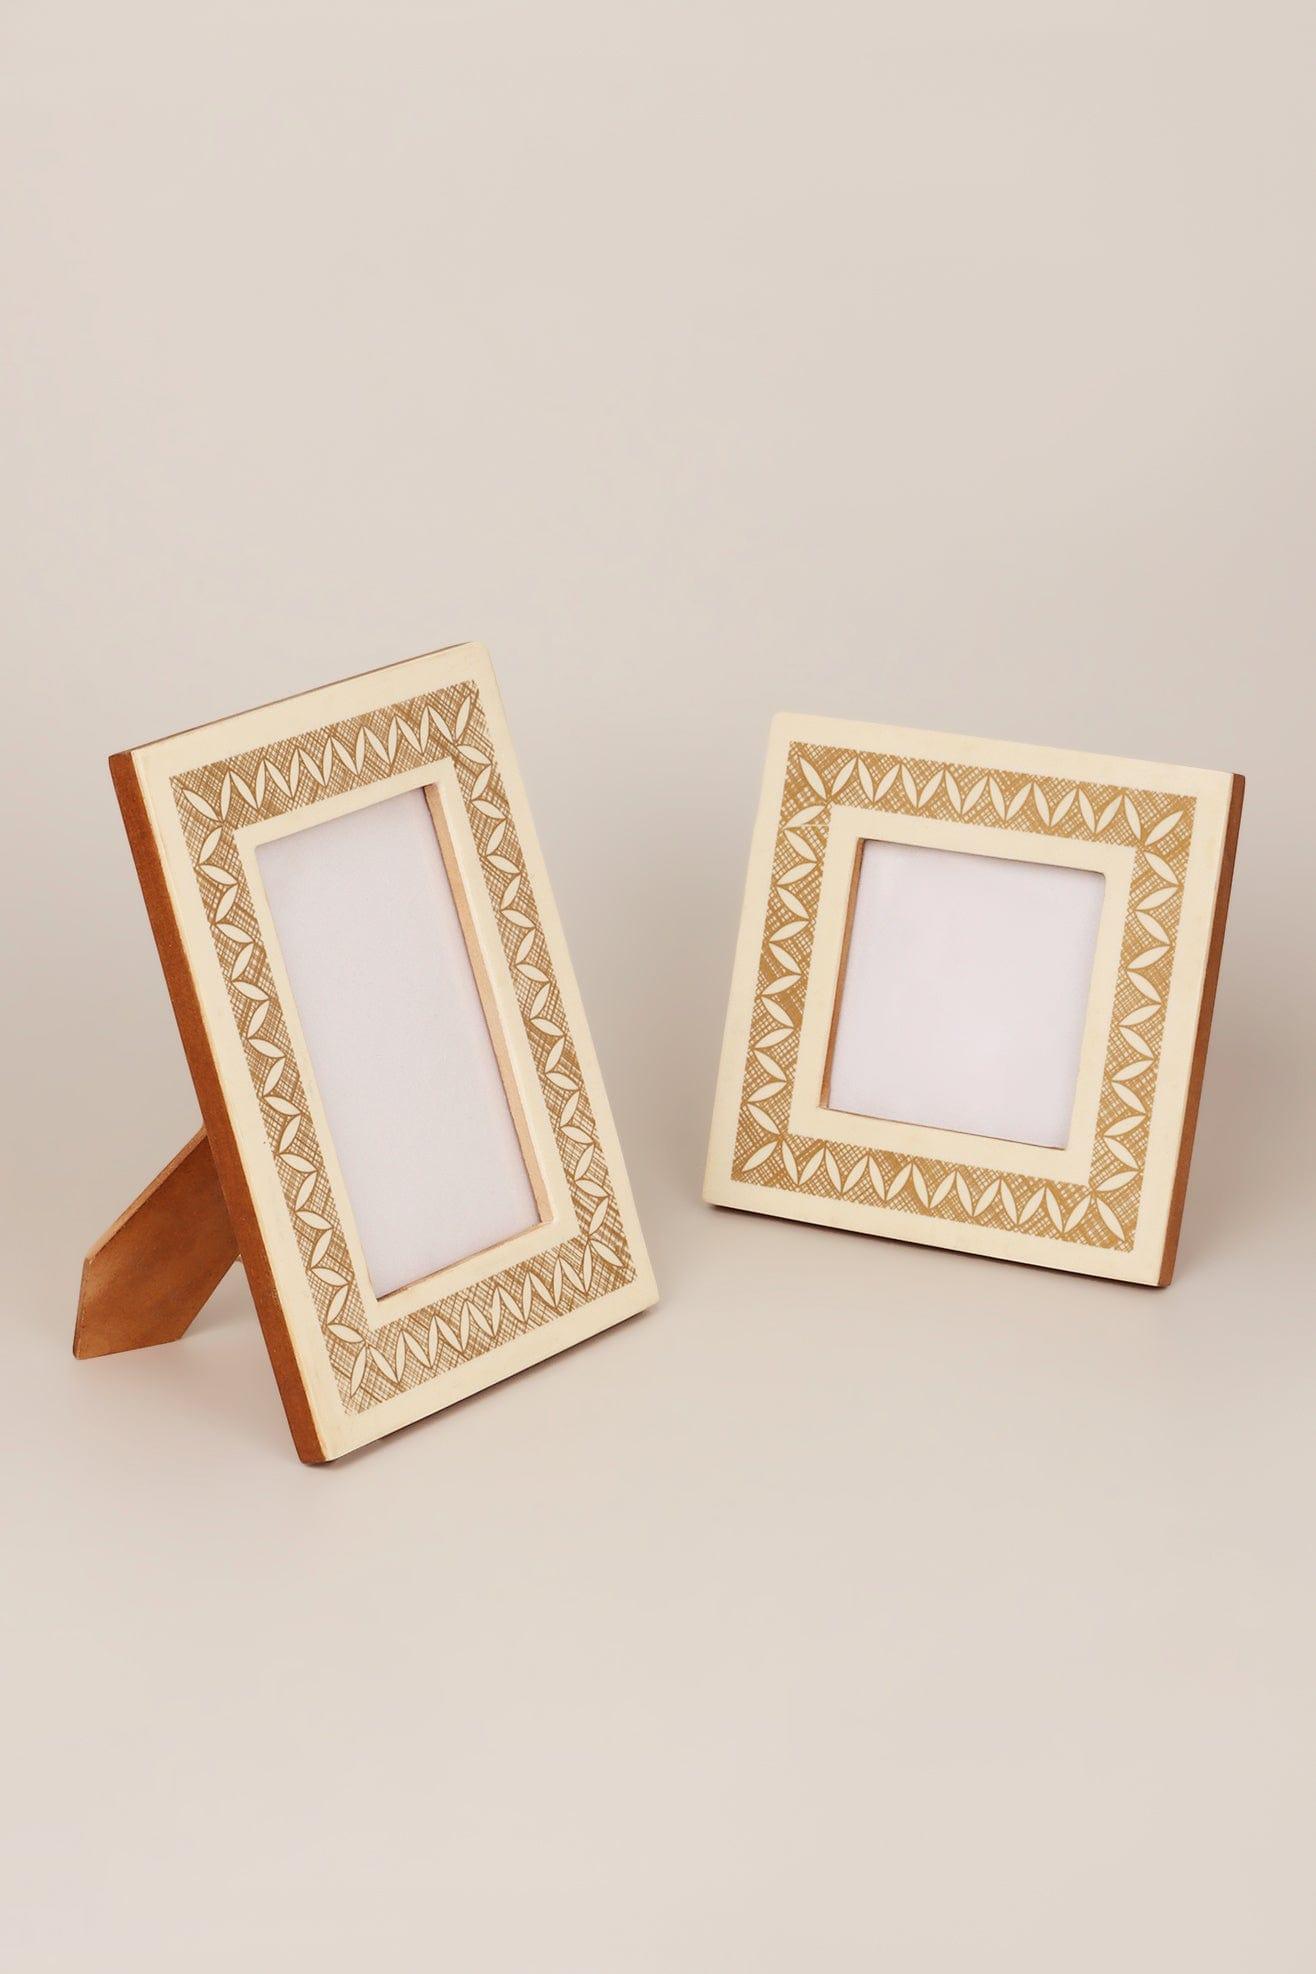 G Decor Picture frames Cream and Brown Wooden Craft Art Stylish Photo Frames